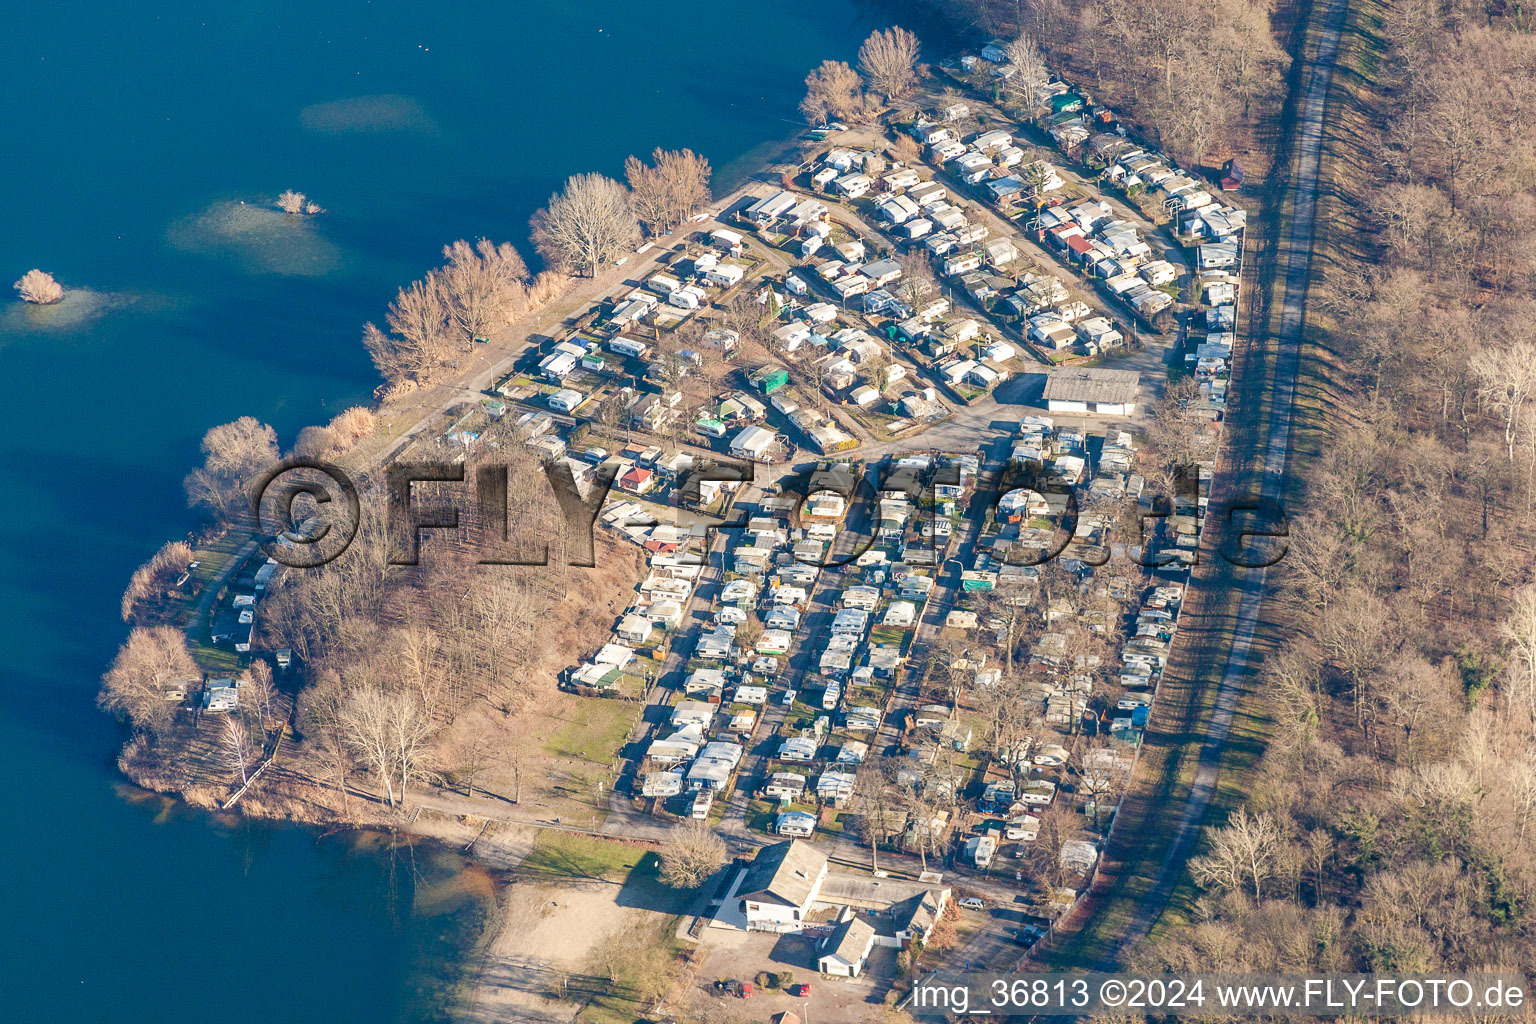 Aerial view of Camping with caravans and tents in Lingenfeld in the state Rhineland-Palatinate, Germany